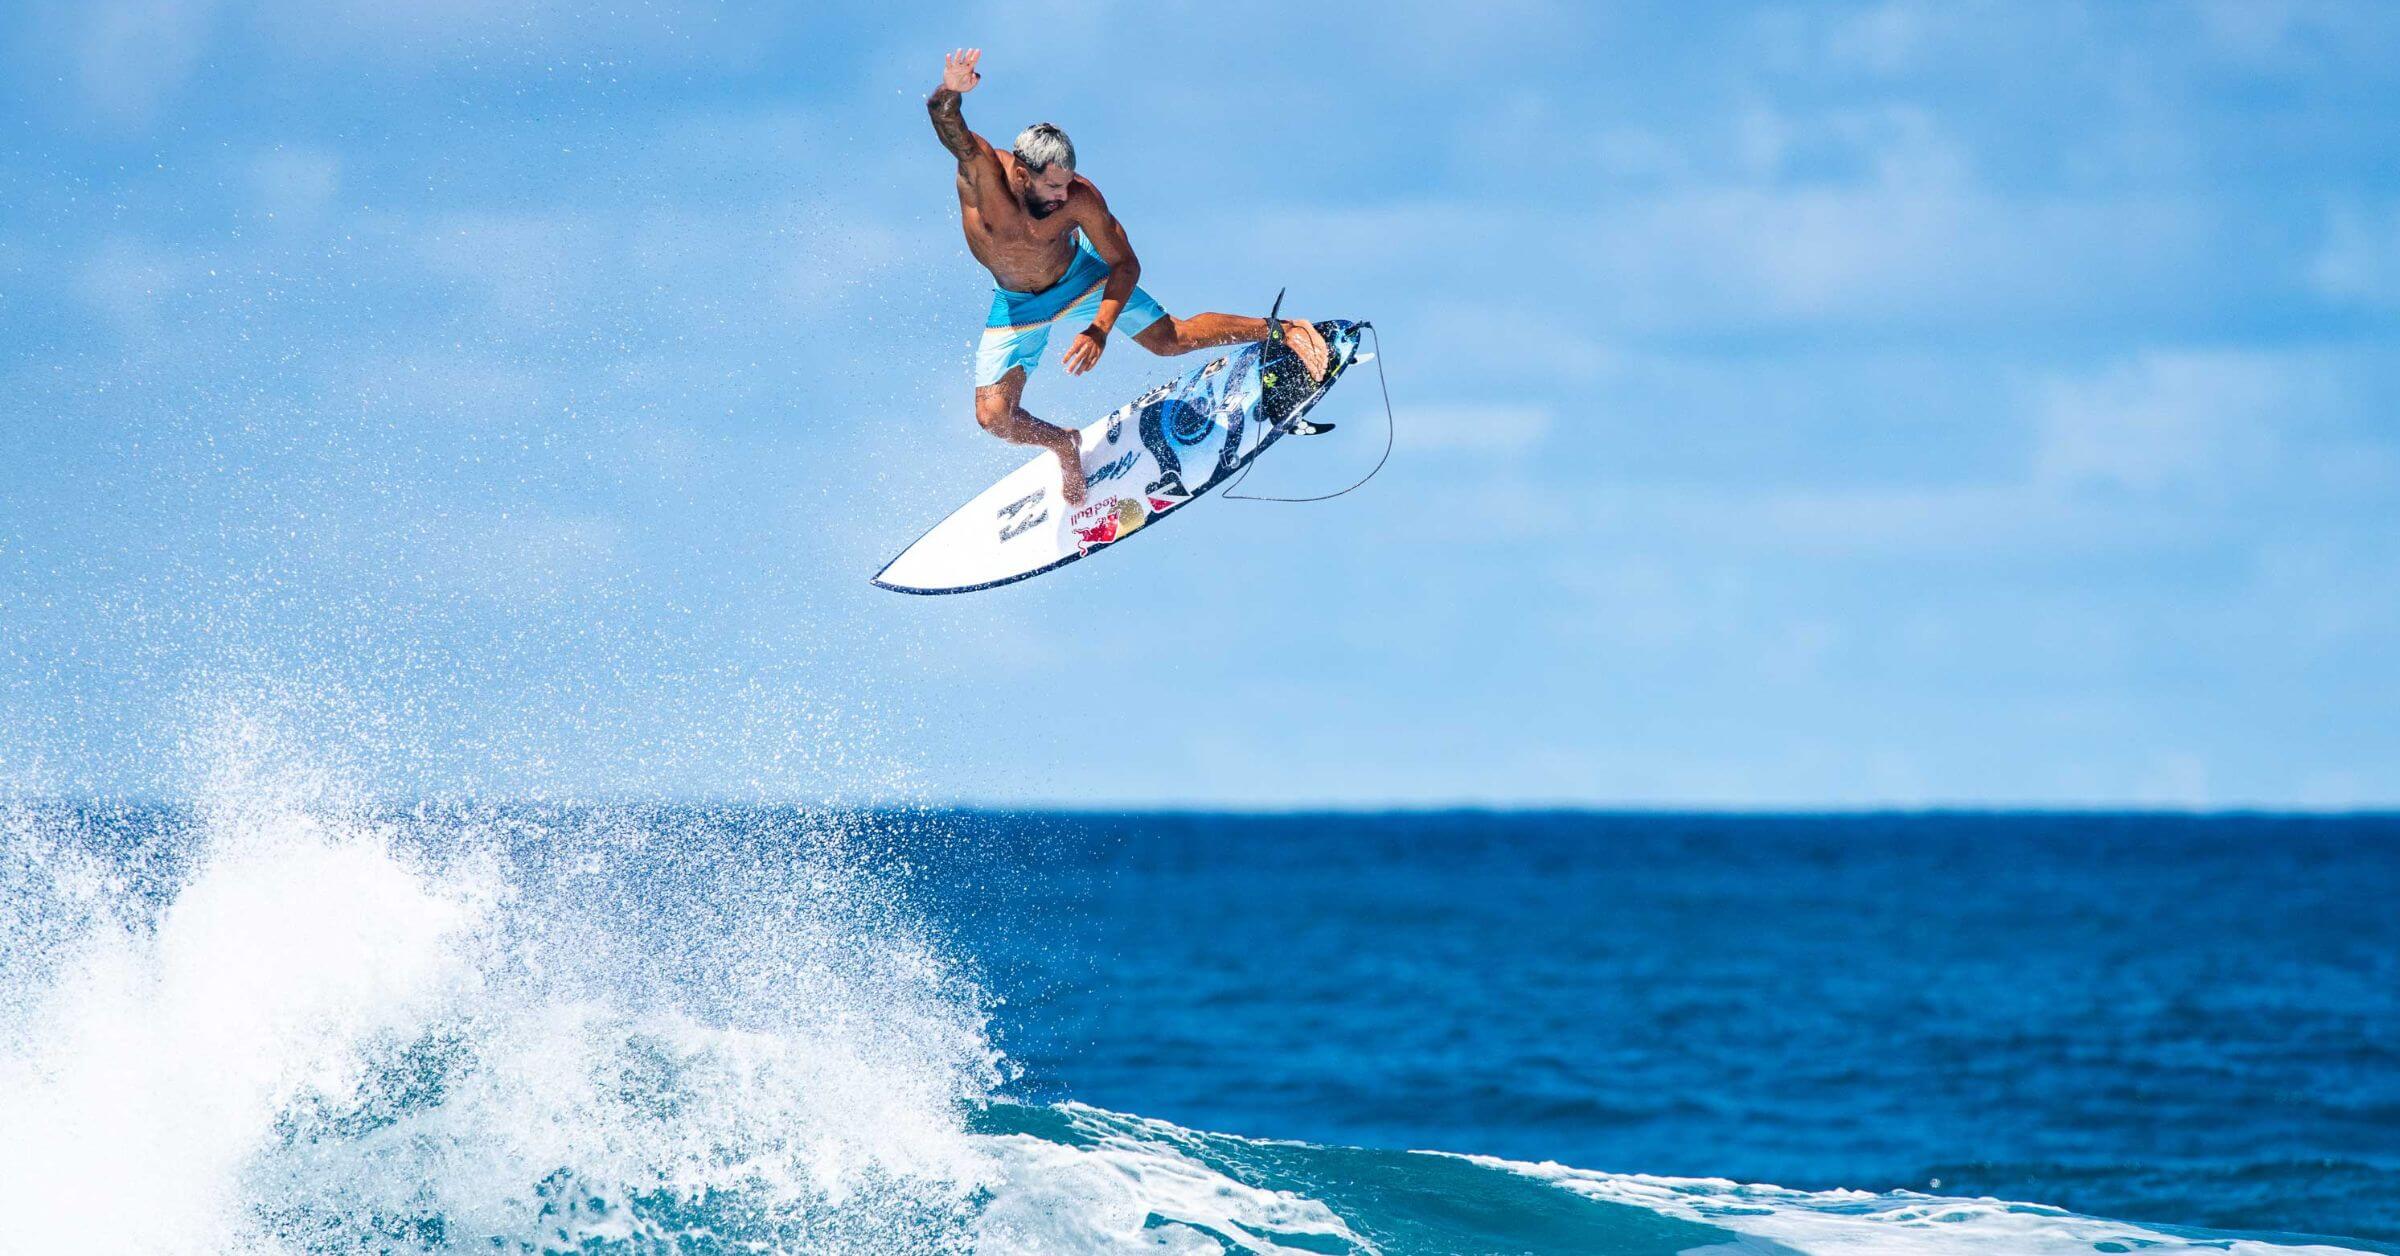 Feel good on and off the waves with Billabong